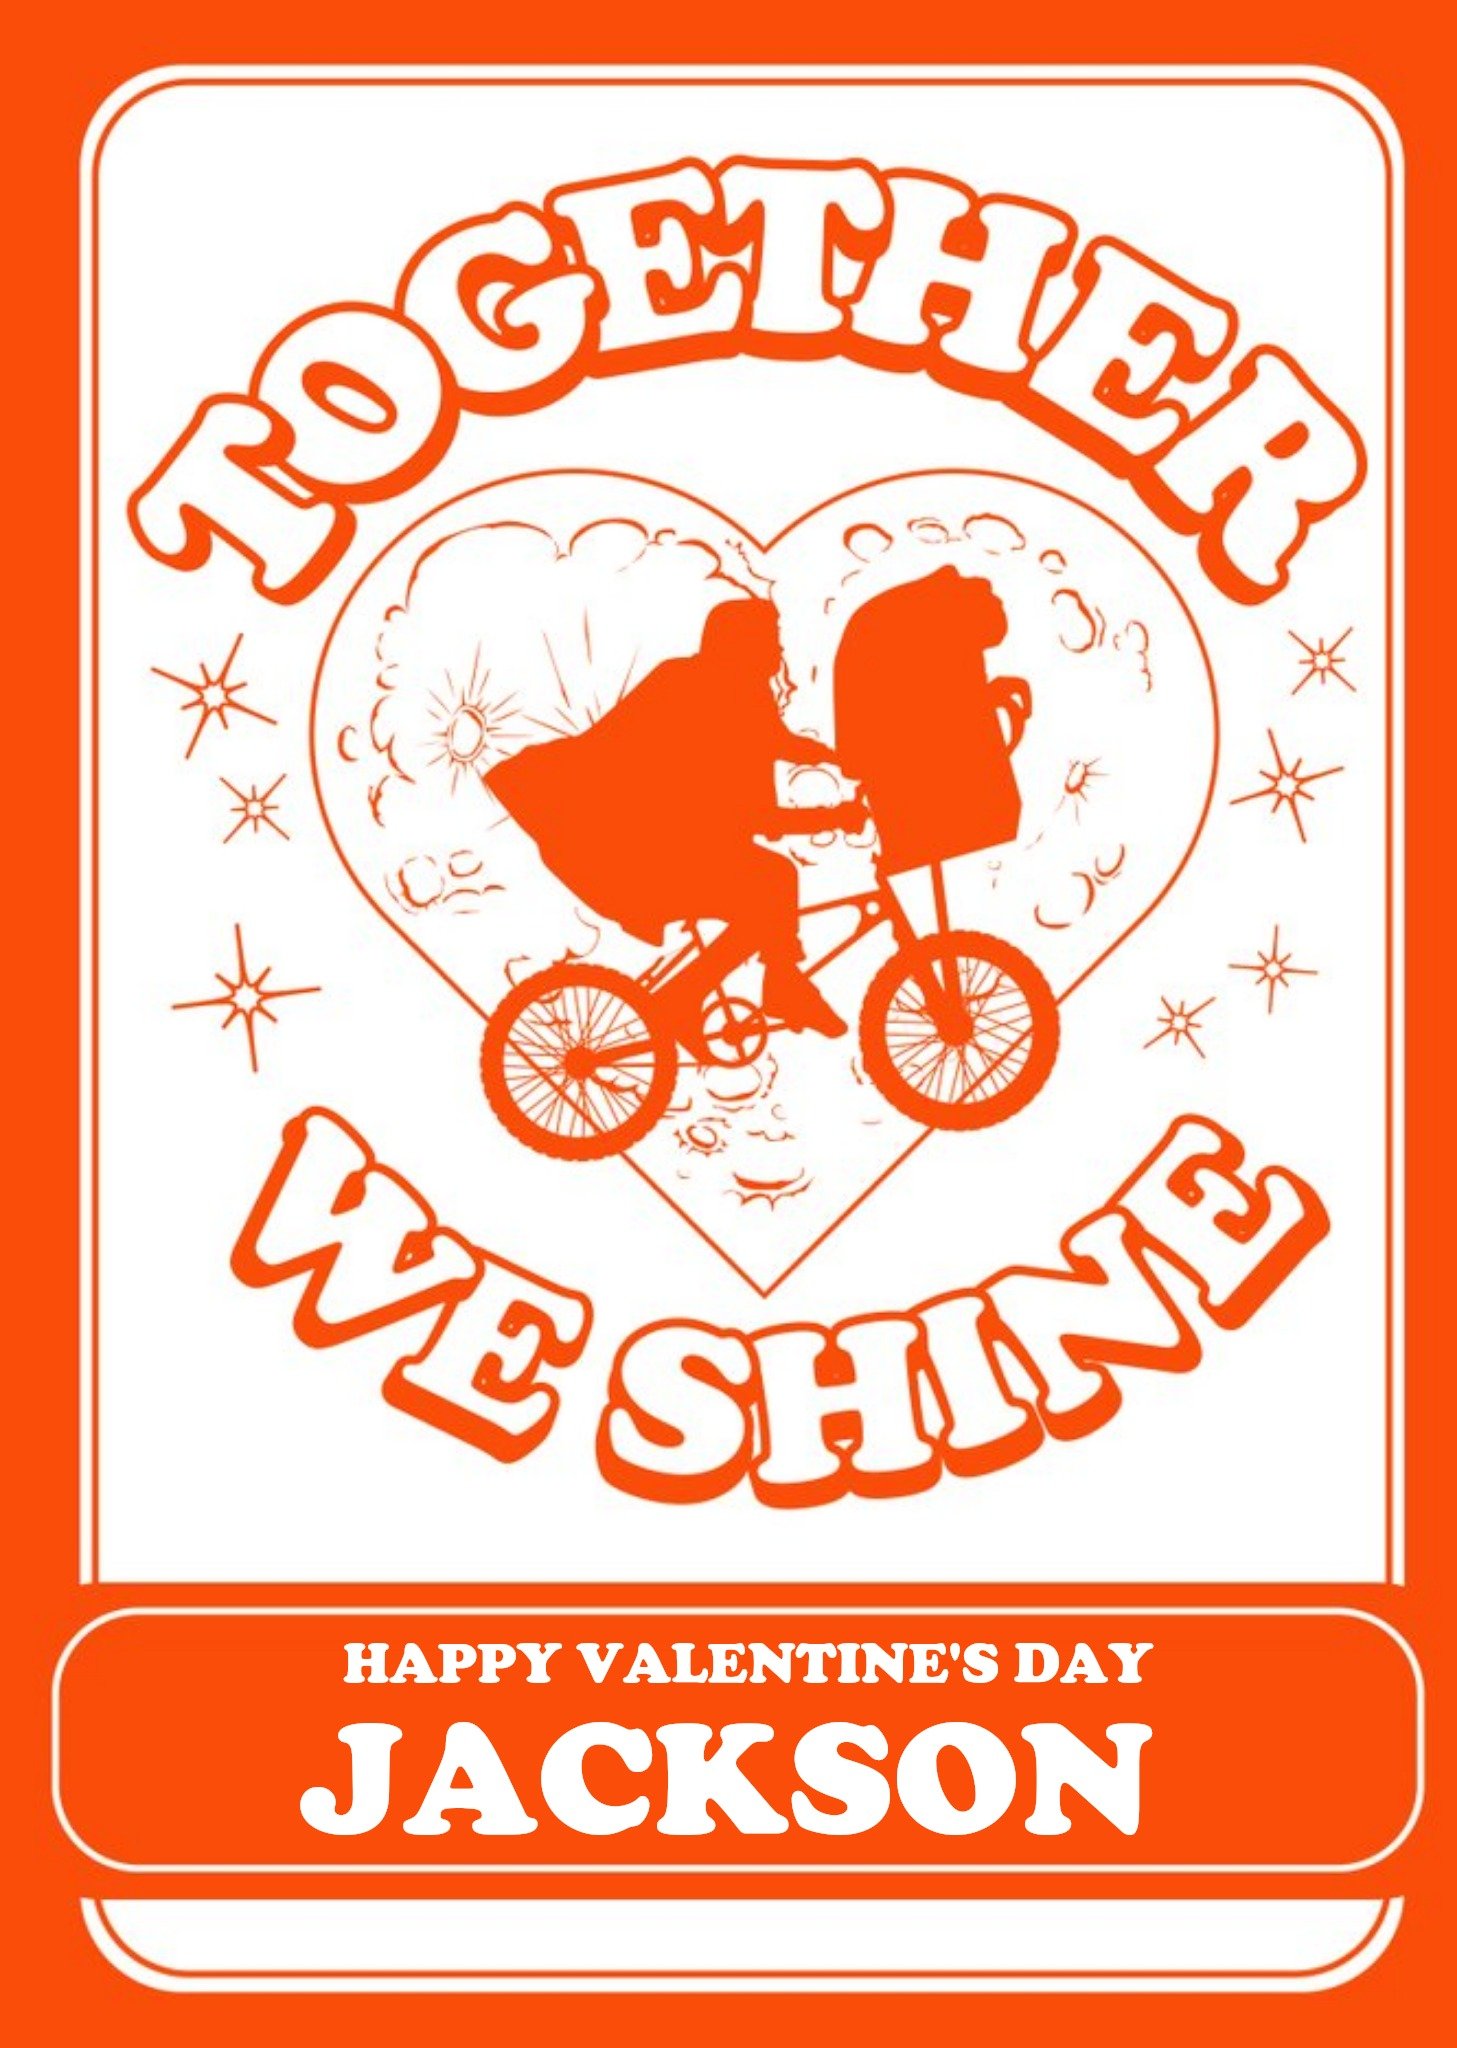 Other E. T Together We Shine Valentine's Day Card Ecard